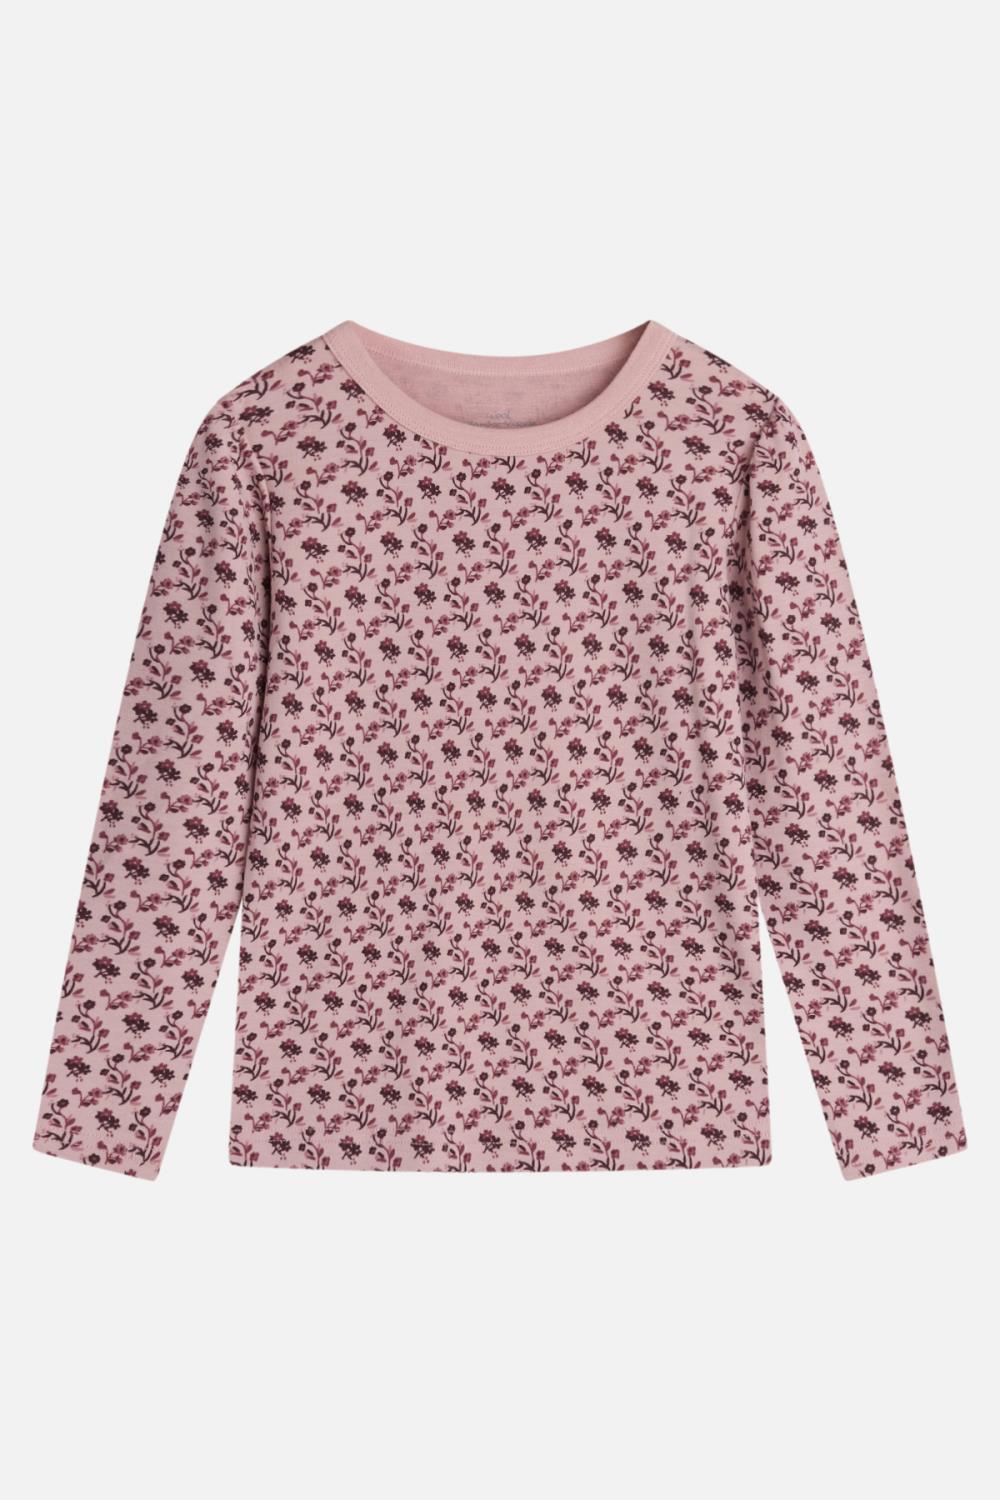 Hust&Claire Abbelin Top, Ull/Bambus - Dusty Rose